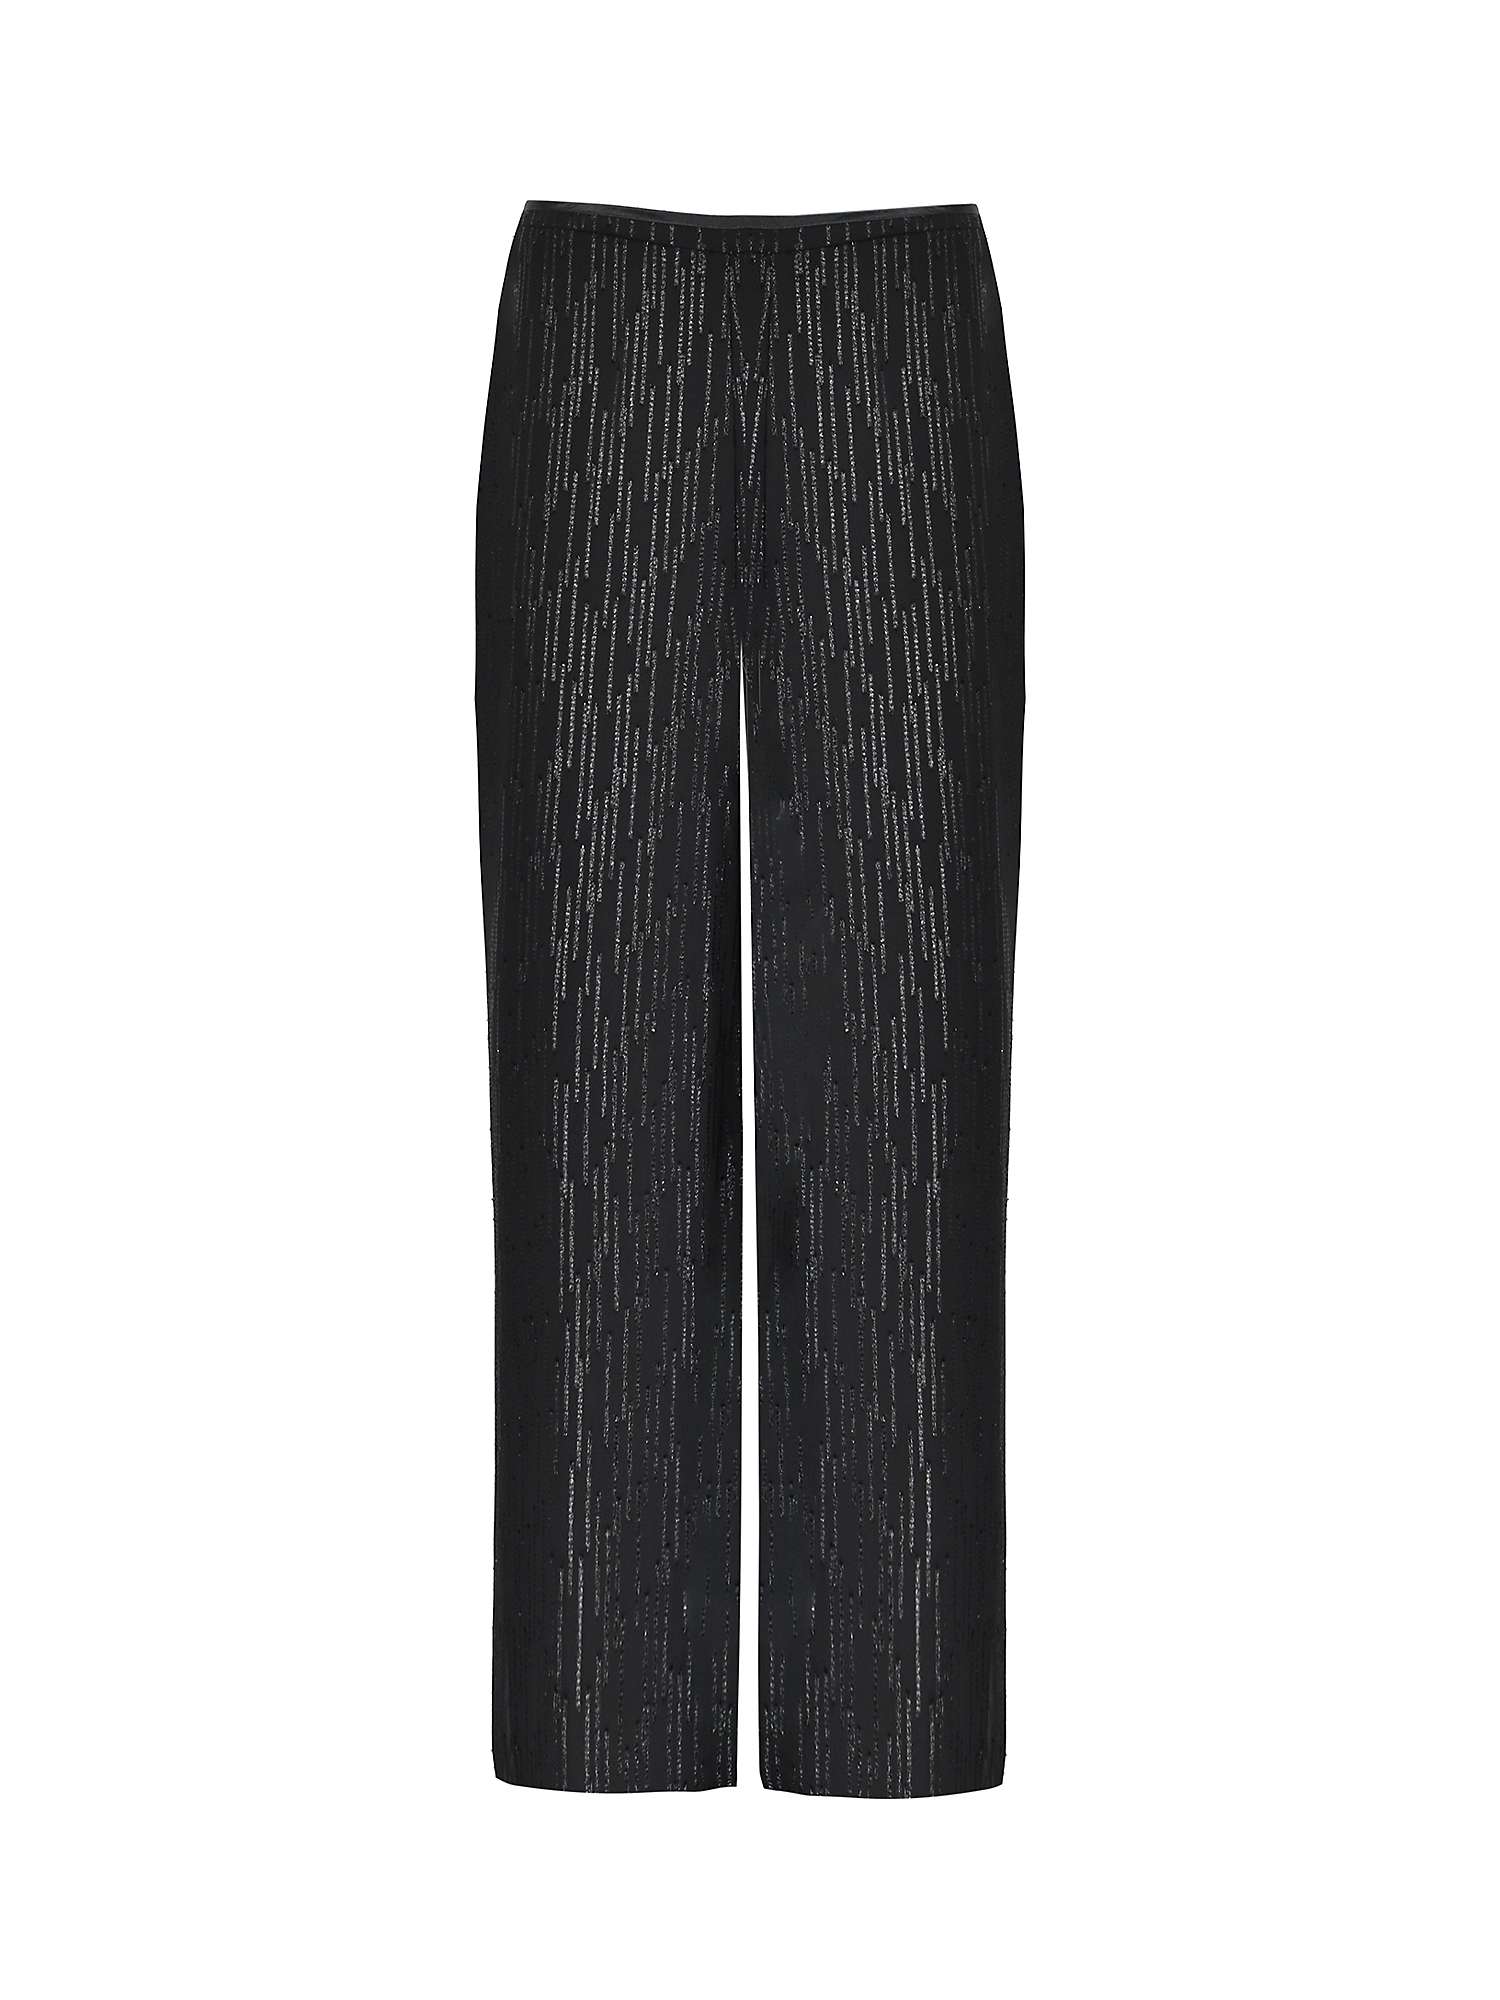 Buy Live Unlimited Curve Shimmer Chiffon Trousers, Black Online at johnlewis.com